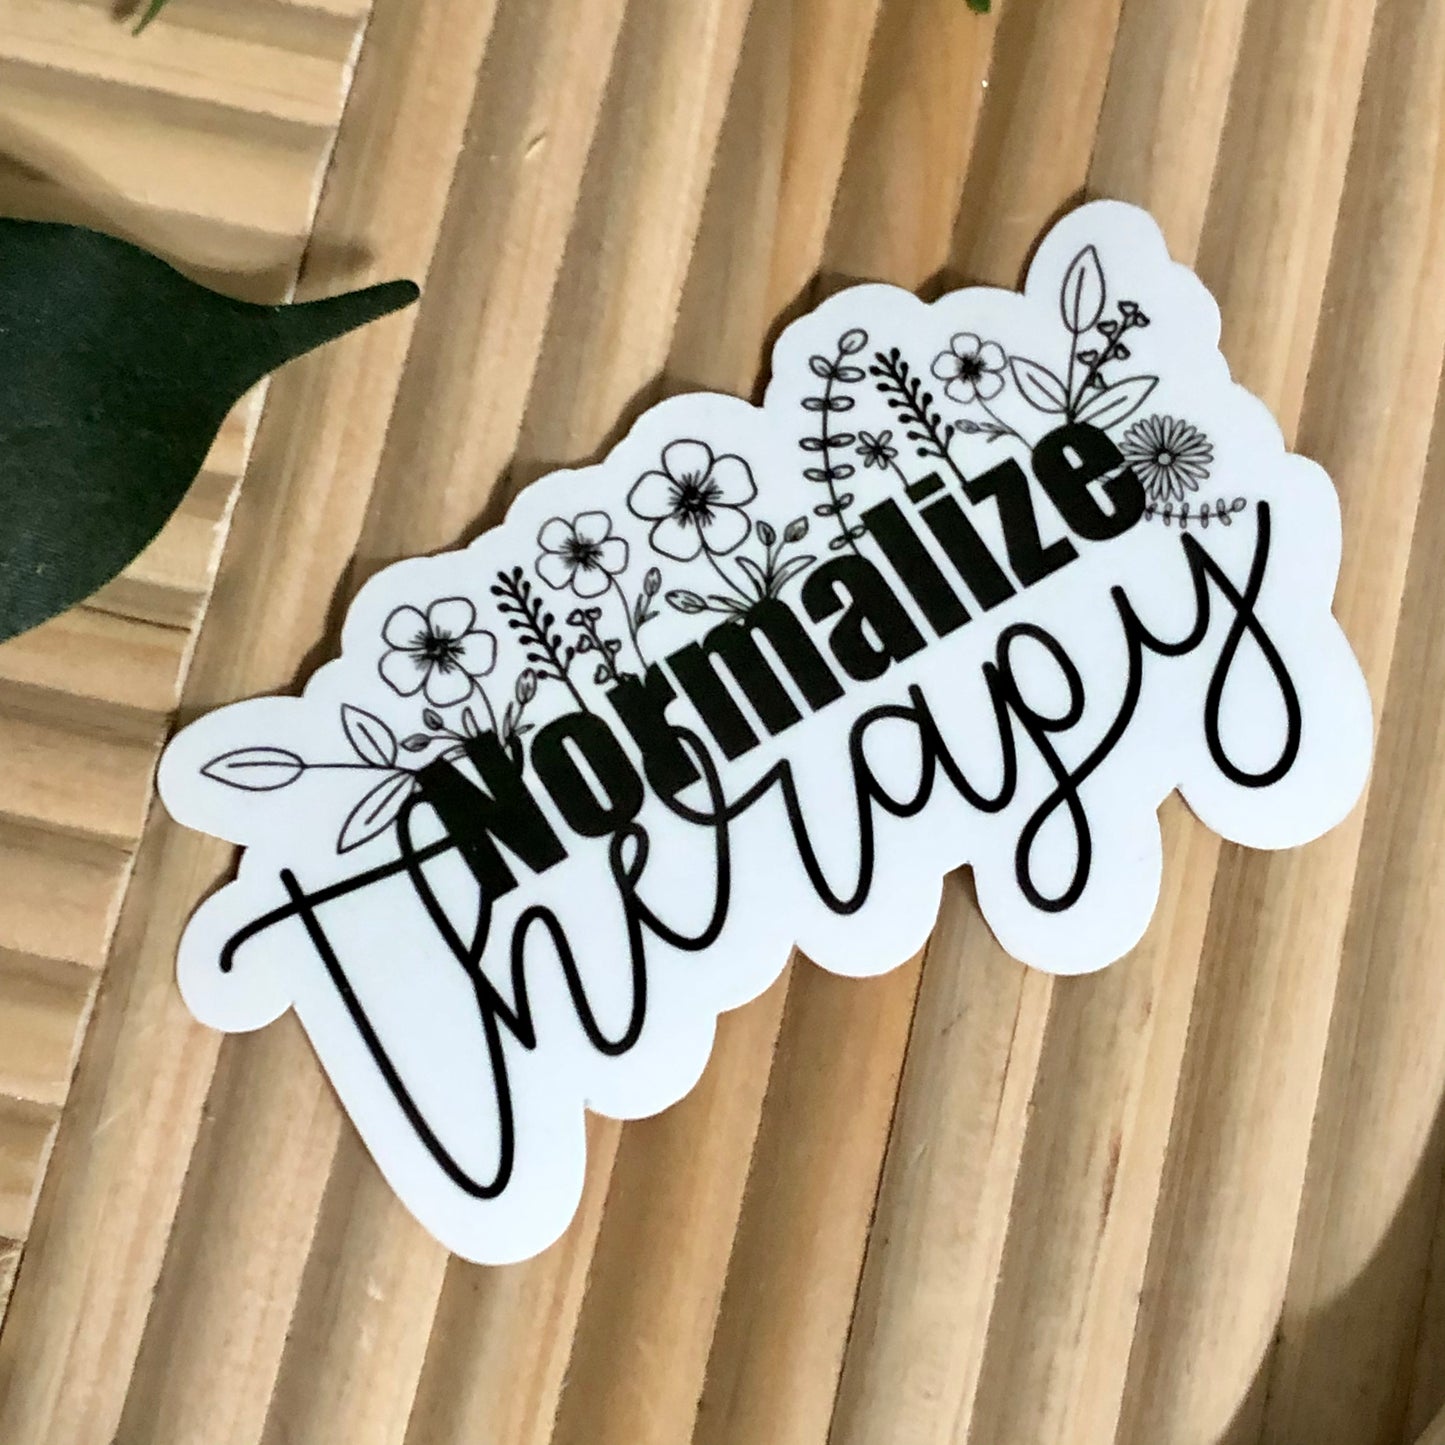 Normalize Therapy Vinyl Sticker.